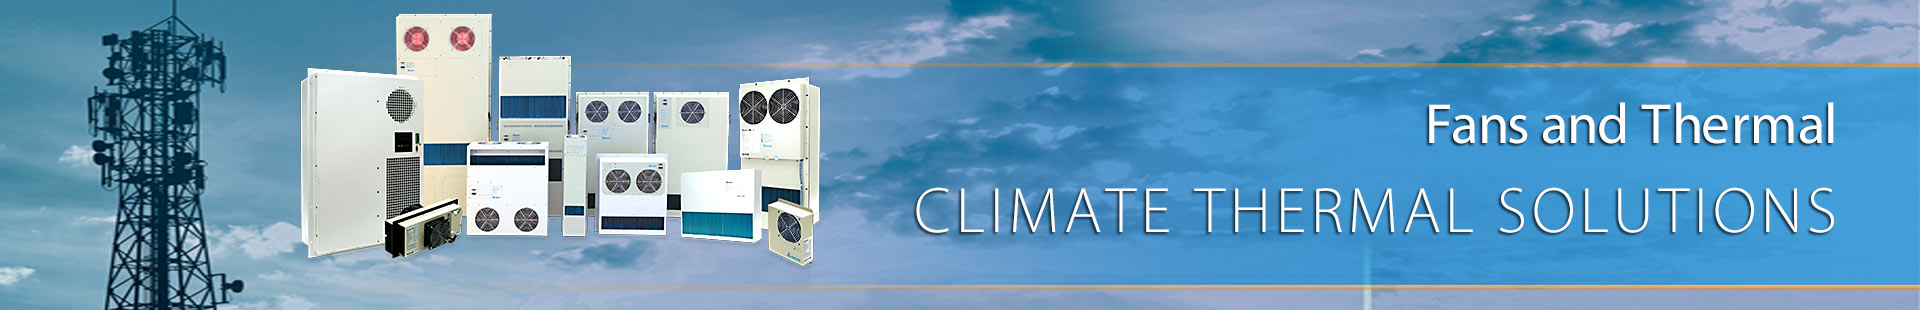 Climate Thermal Solutions